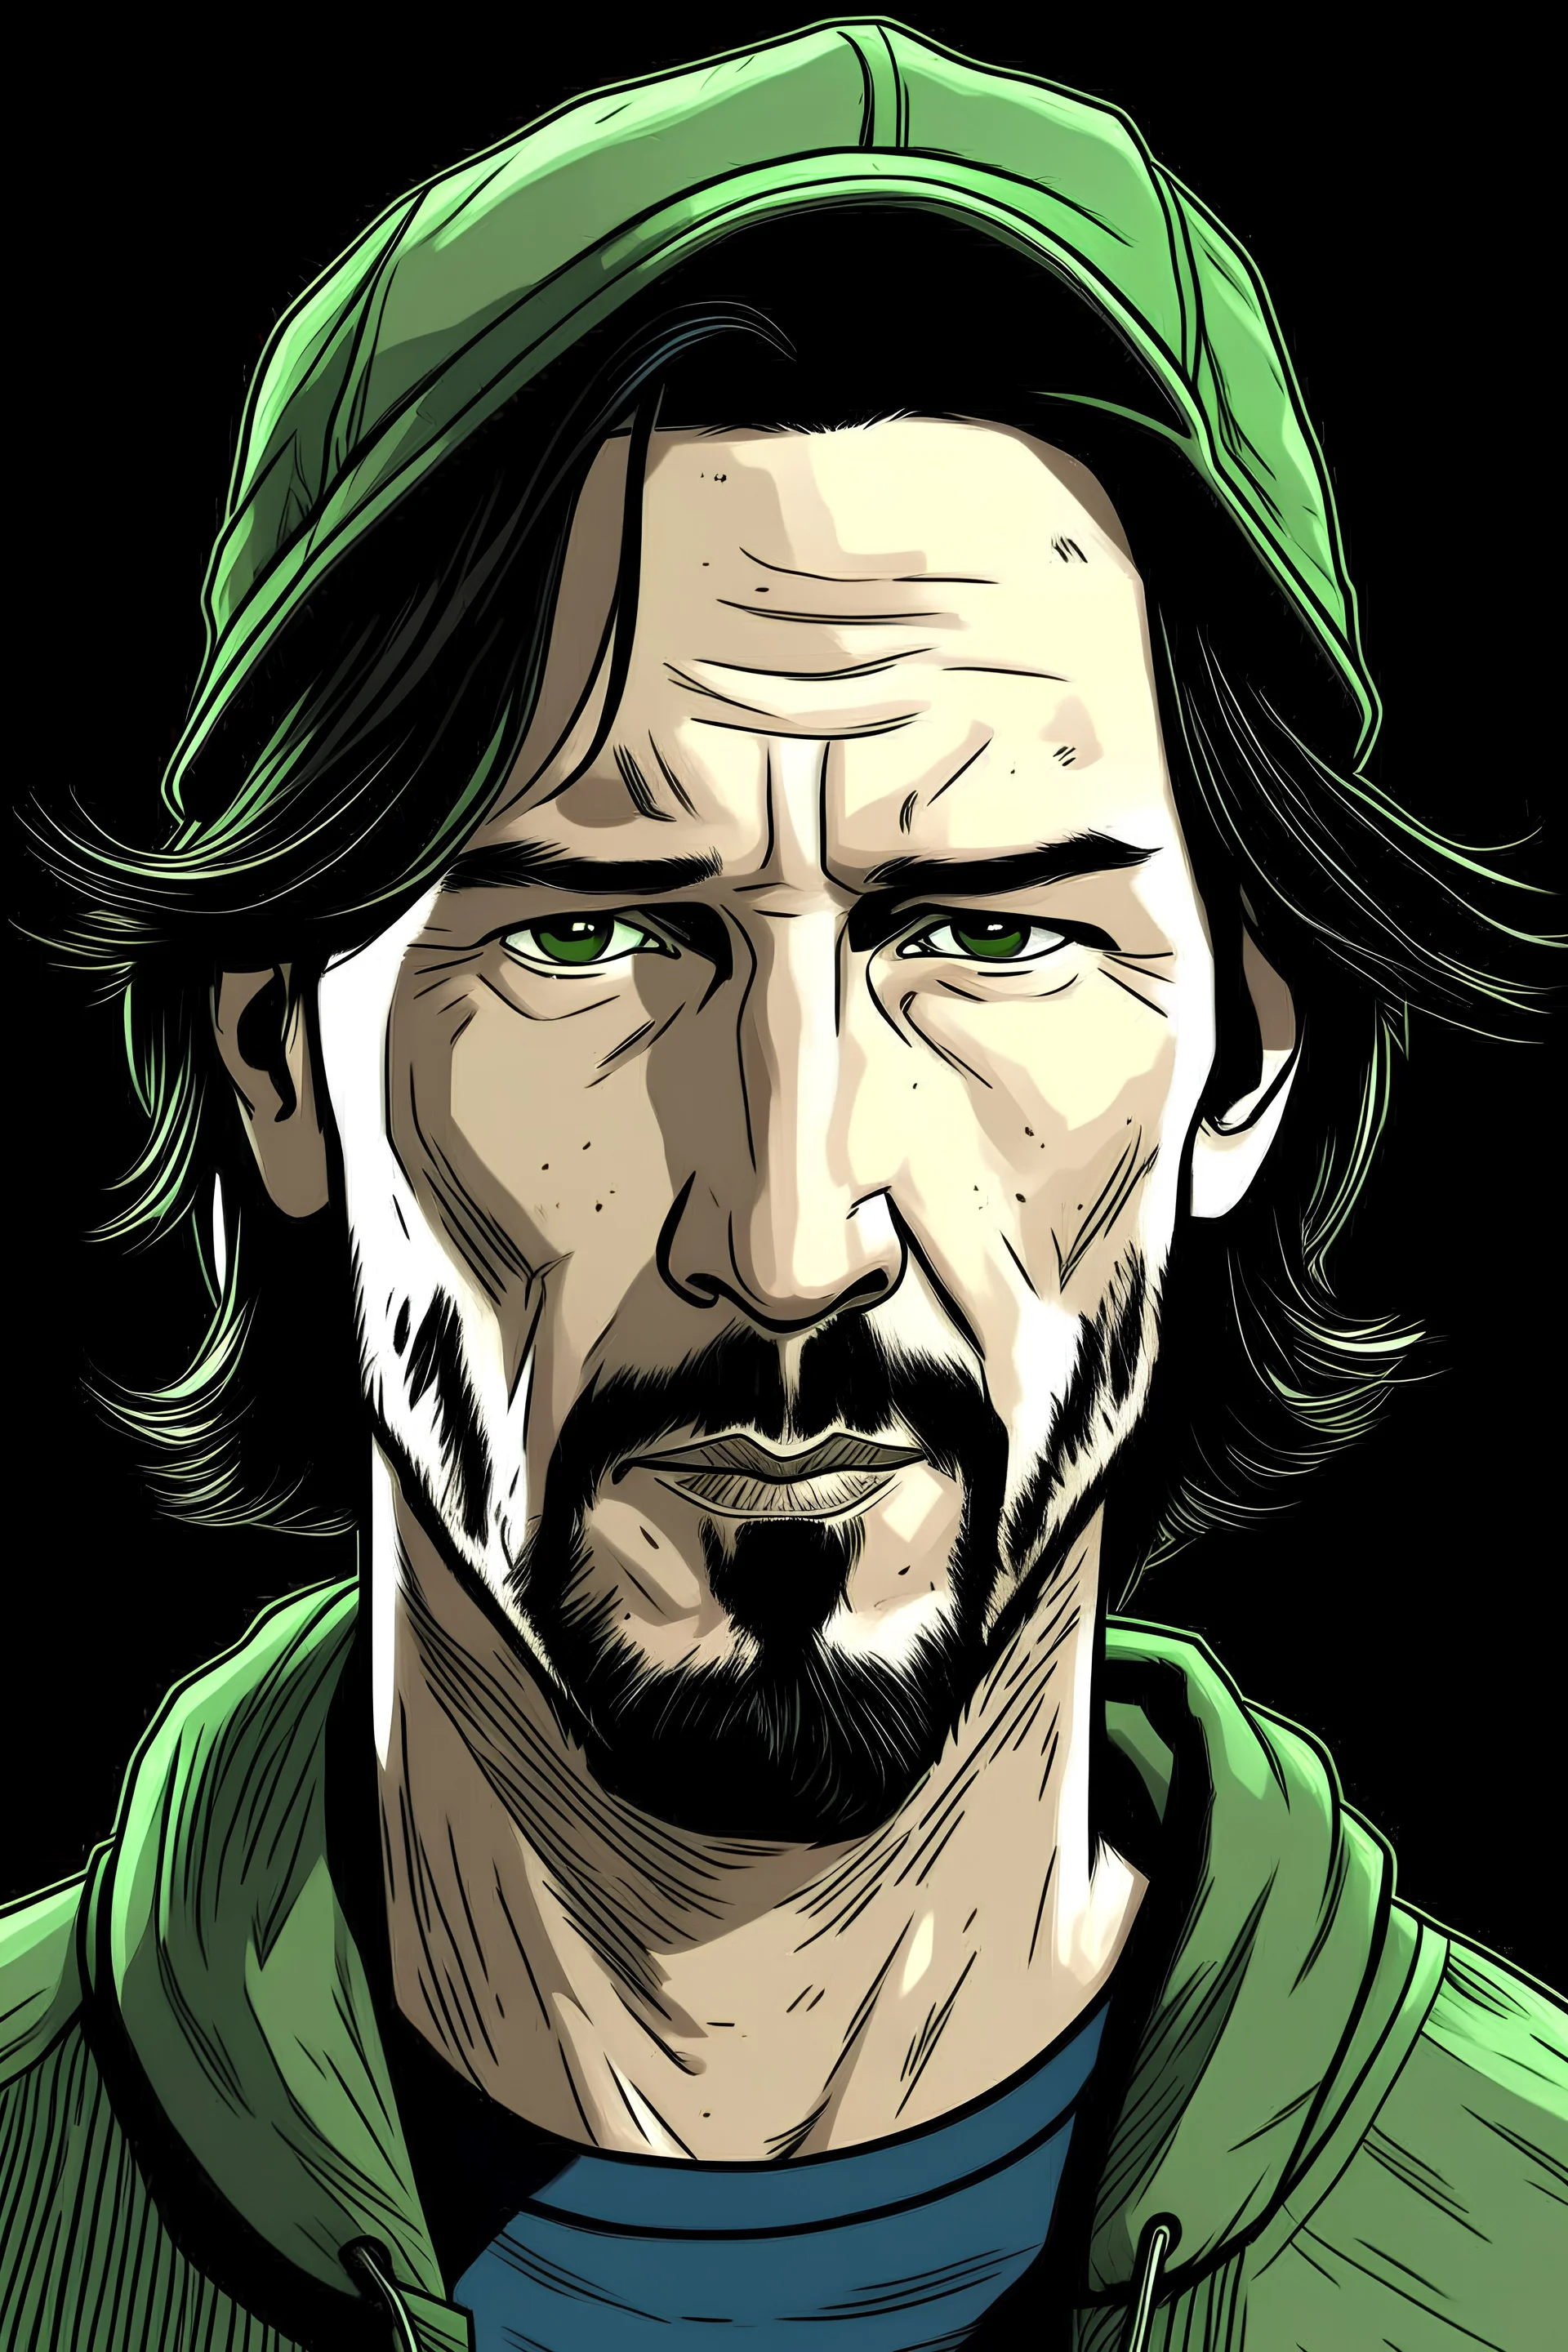 Keanu reeves lookalike with short hair and baseball hat comic book style tales from the crypt horror